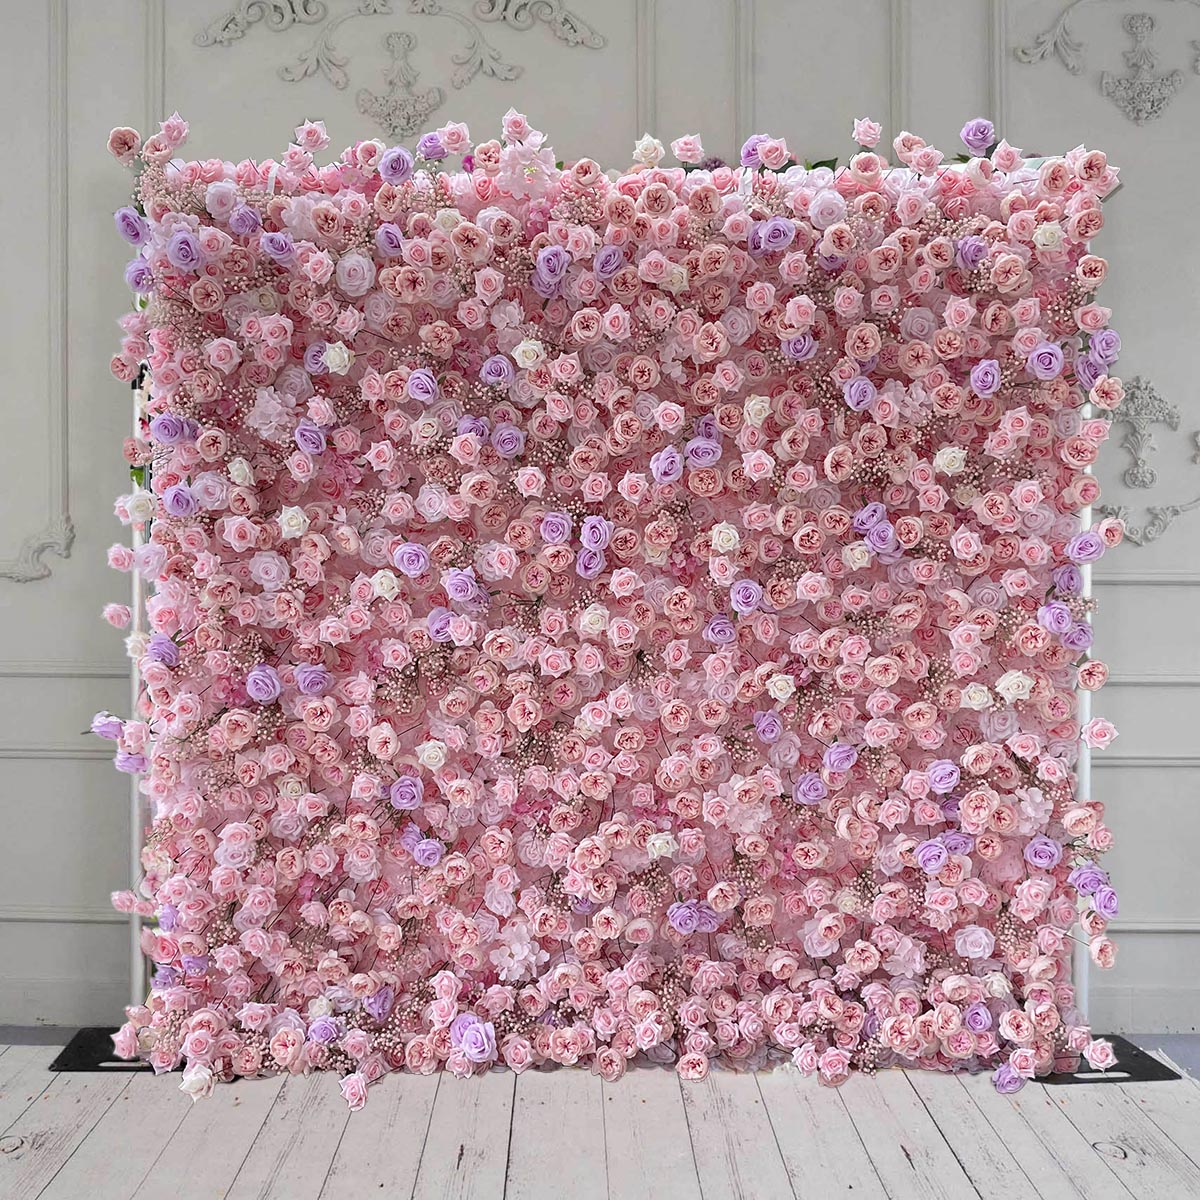 100% handmade, the pink purple rose & baby's breath  flower wall provides a lifelike appearance and is easy to set up.